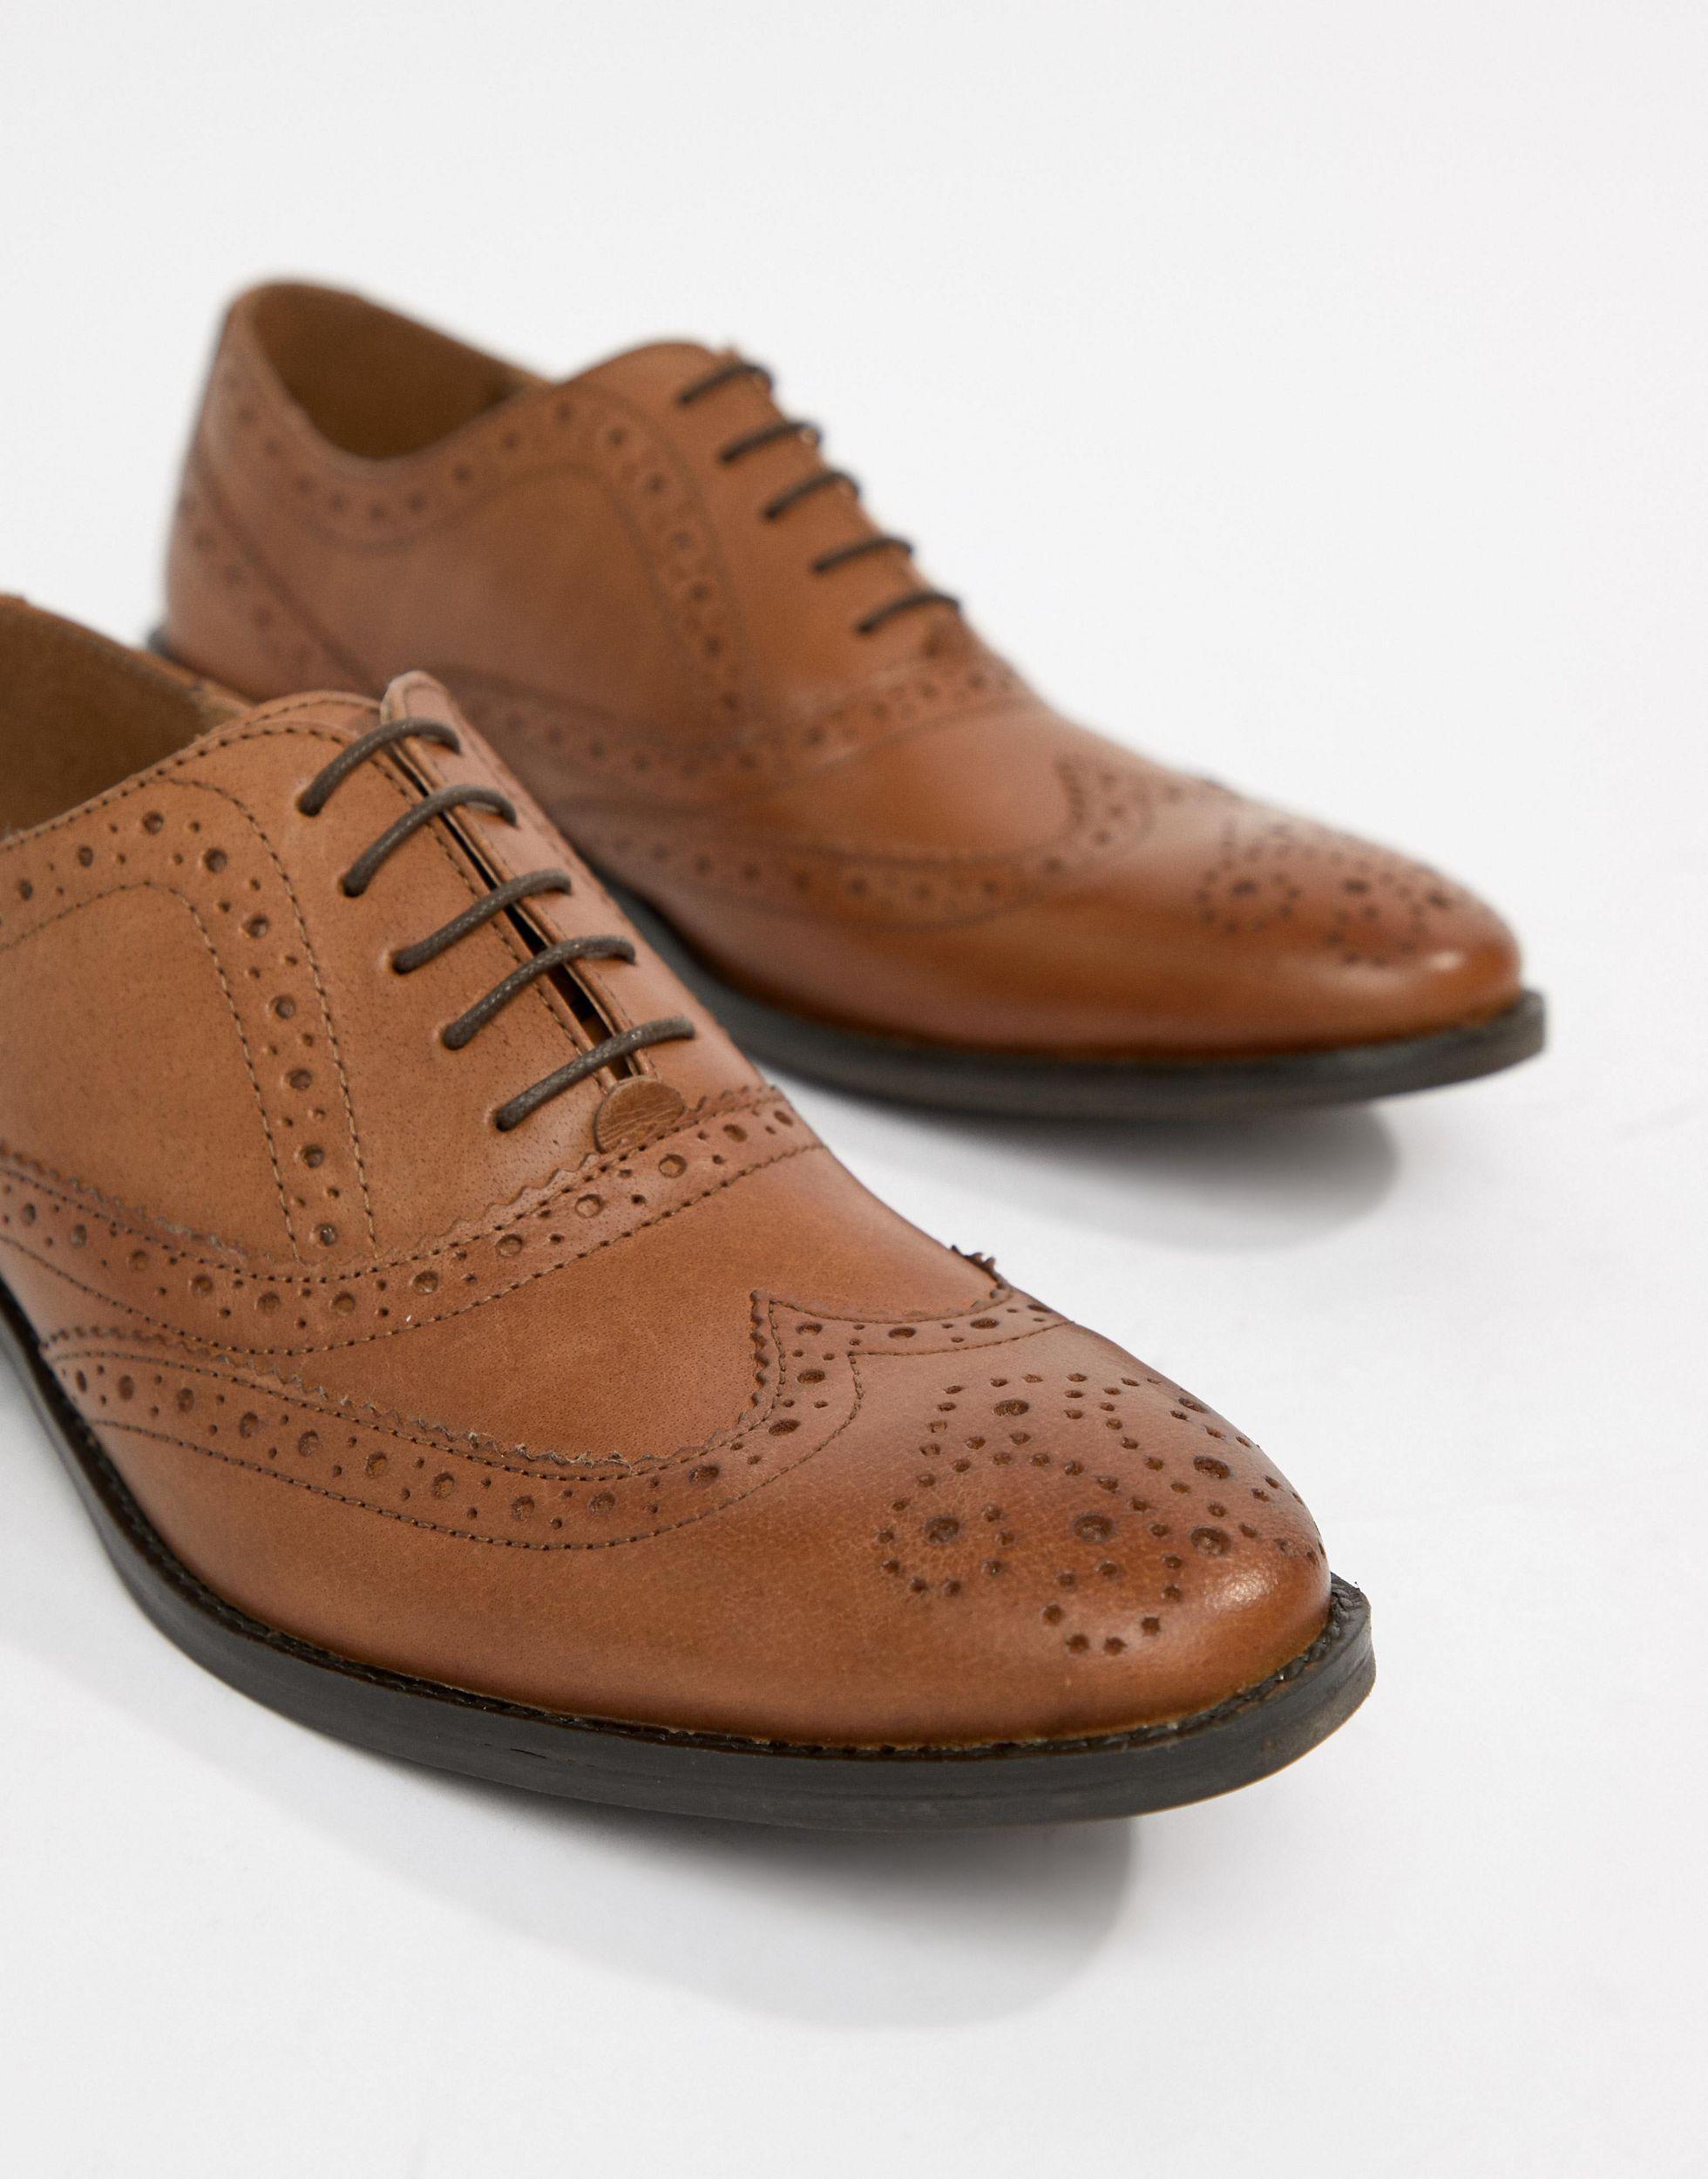 ASOS Oxford Brogue Shoes In Tan Leather - Wide Fit Available in Brown